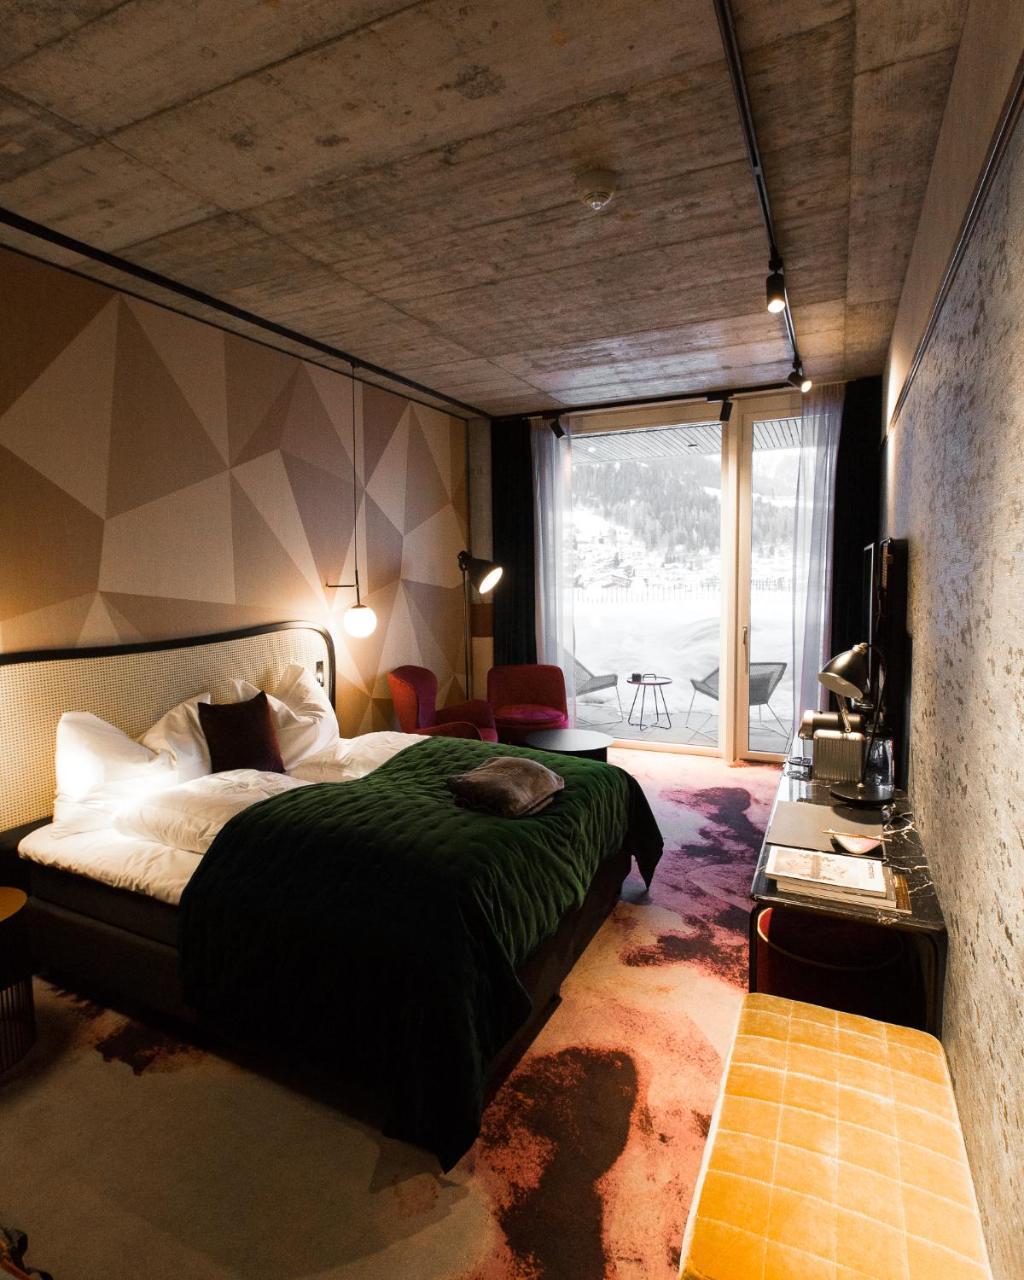 The Hide Flims Hotel A Member Of Design Hotels 外观 照片